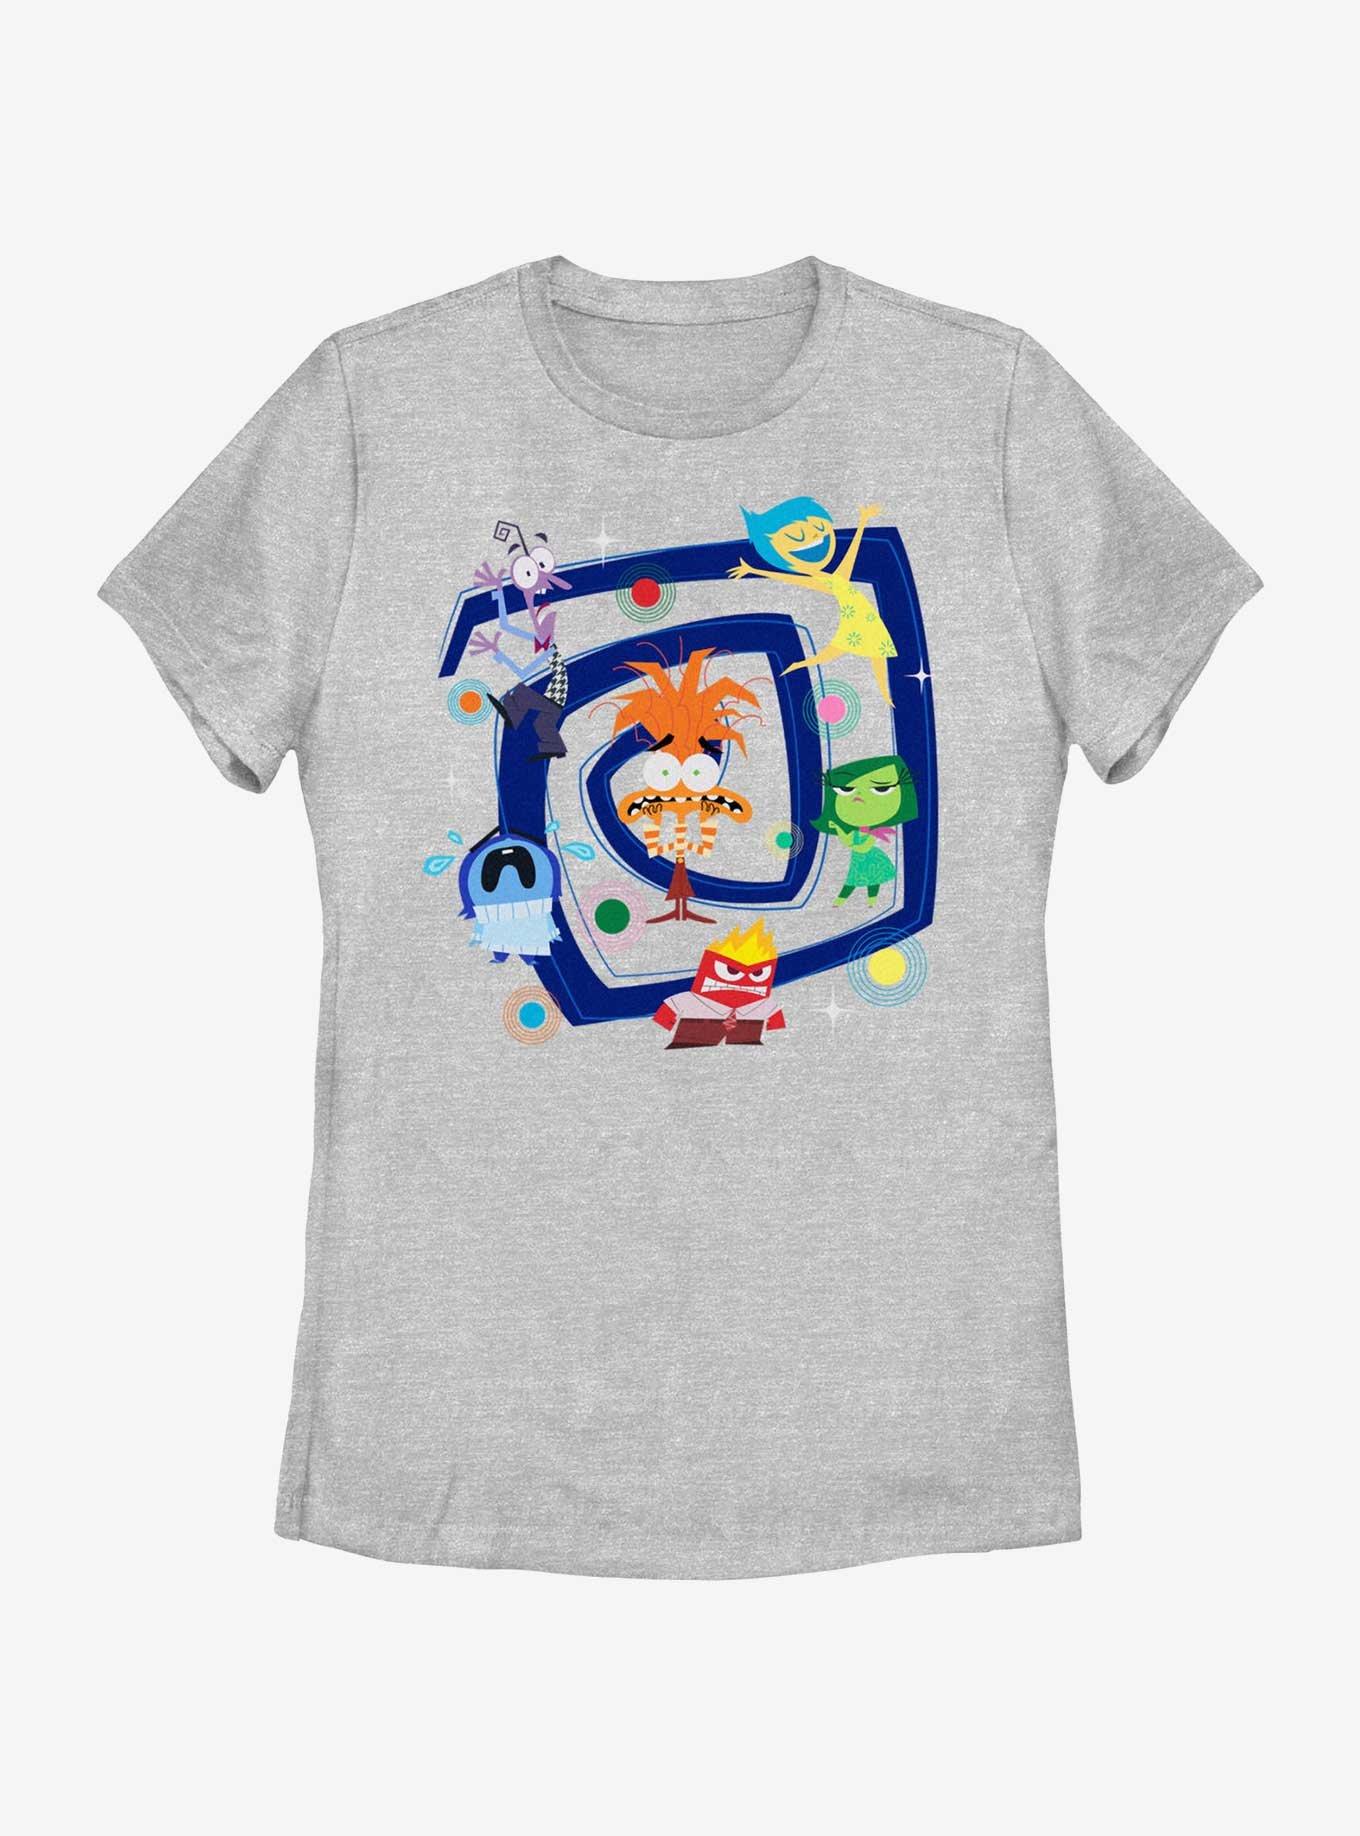 Disney Pixar Inside Out 2 All Emotions Swirling Womens T-Shirt, ATH HTR, hi-res